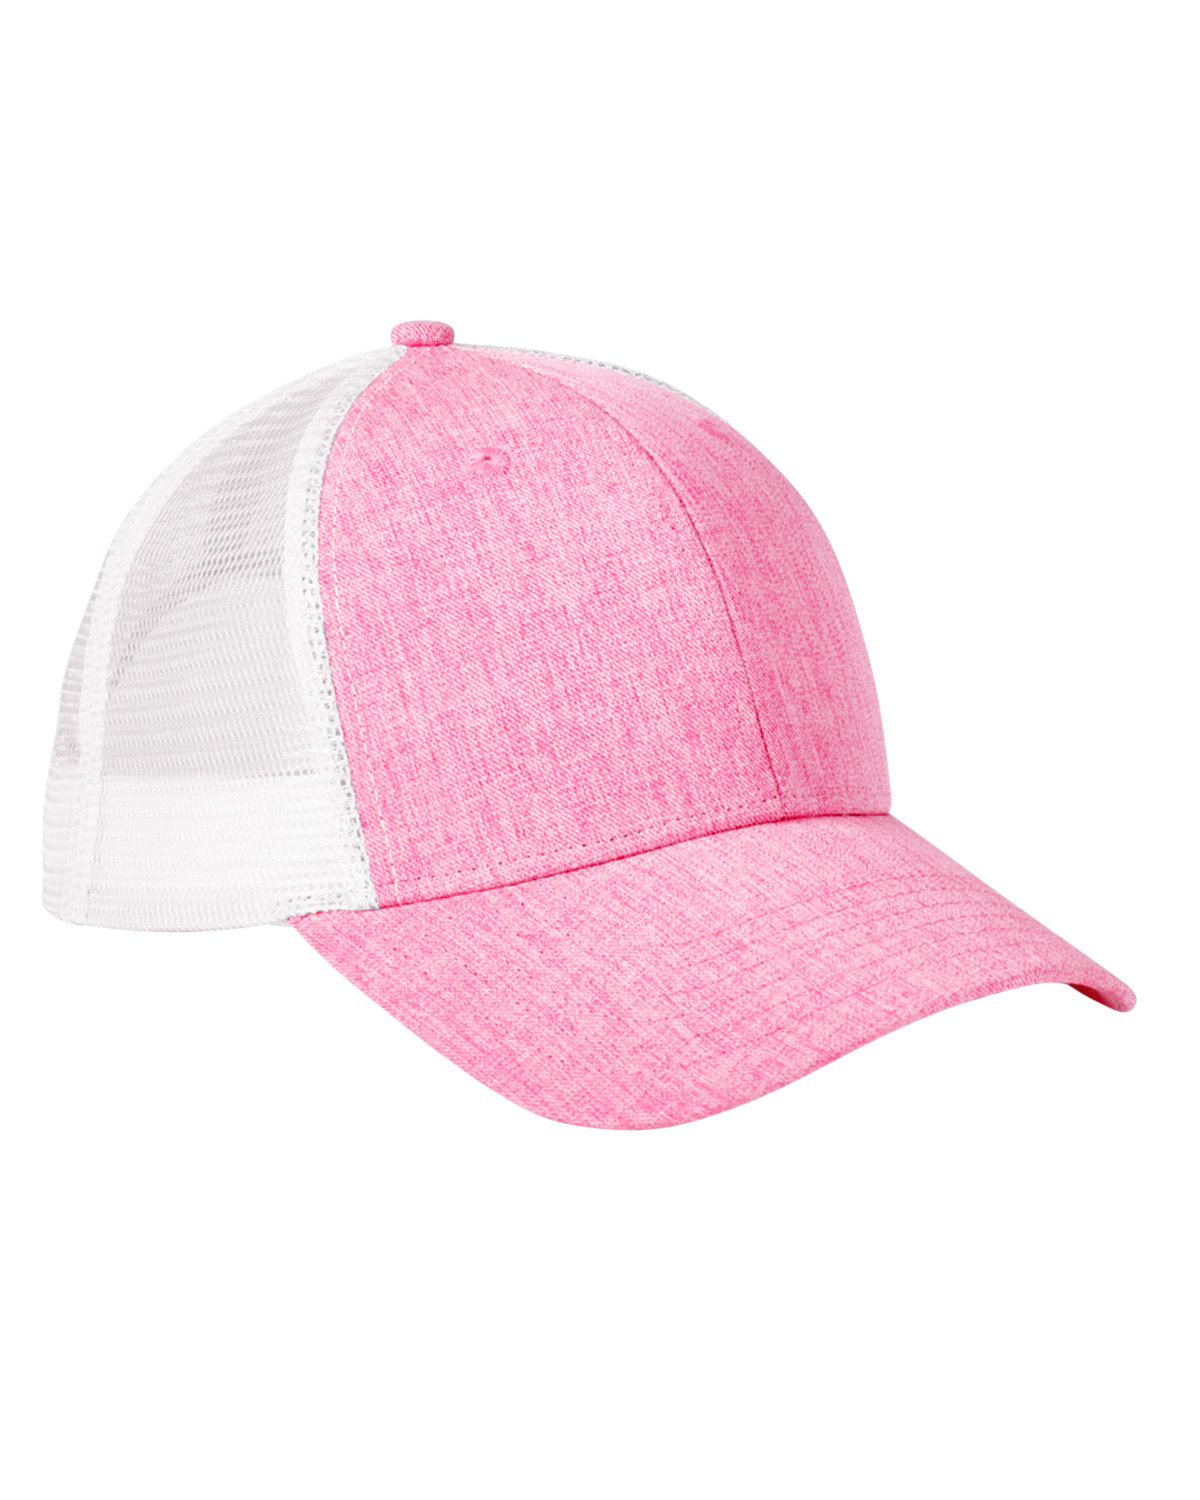 click to view HTHR PINK/WHT